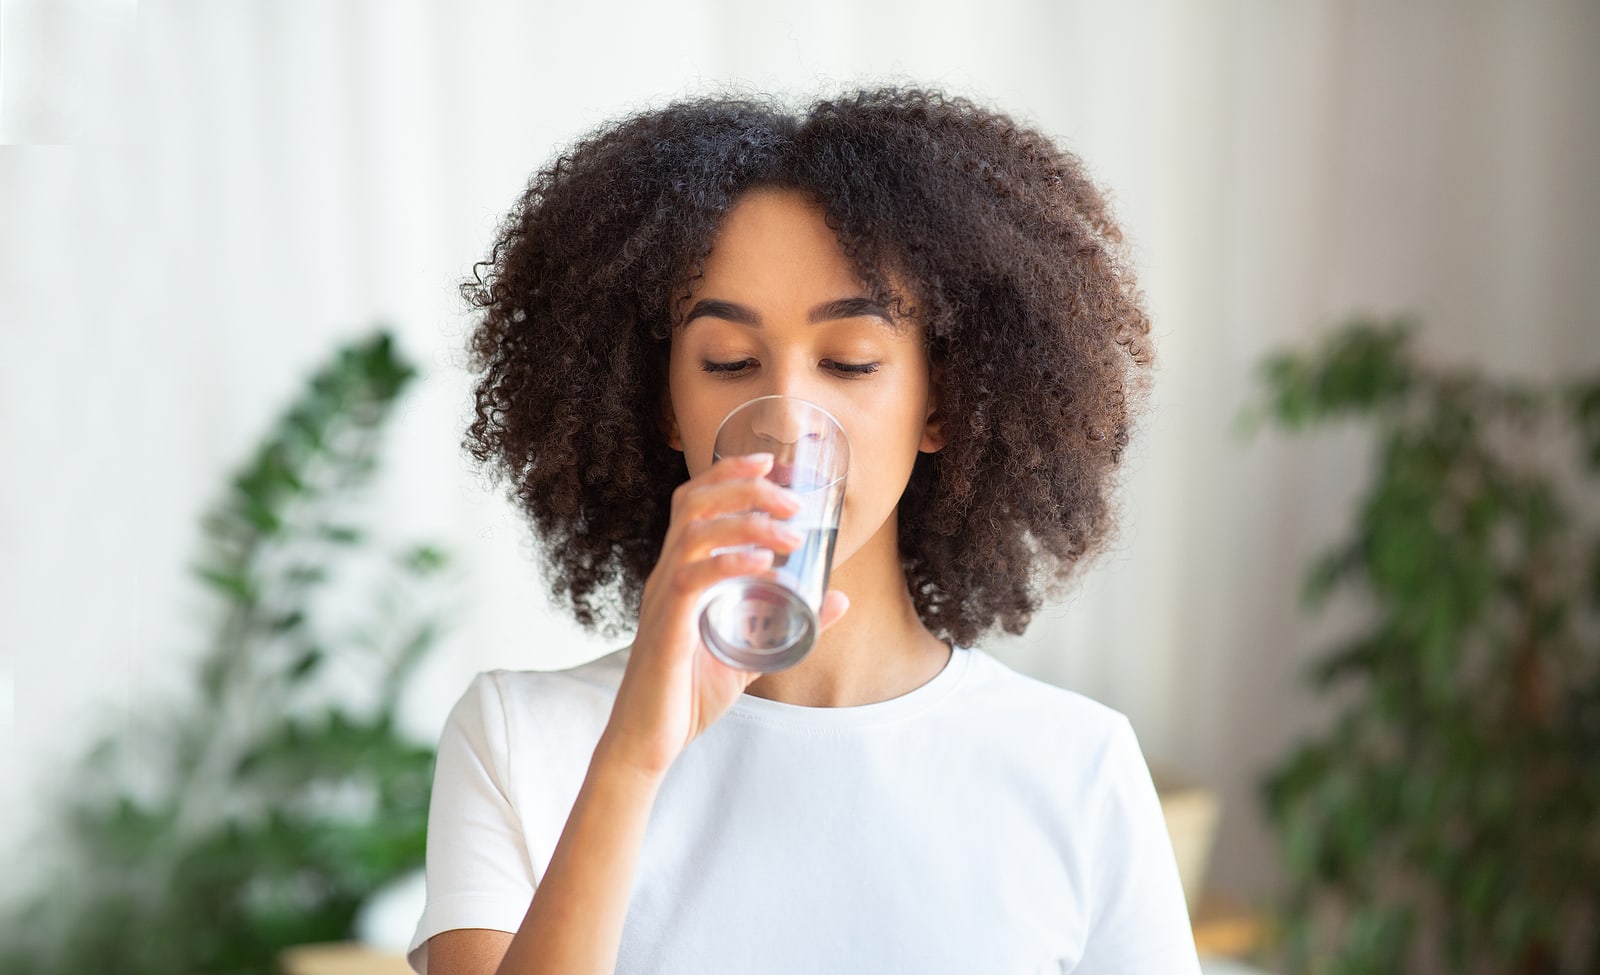 Sparkling Water Brands With Low PFAS Chemicals - Healthier Seltzers